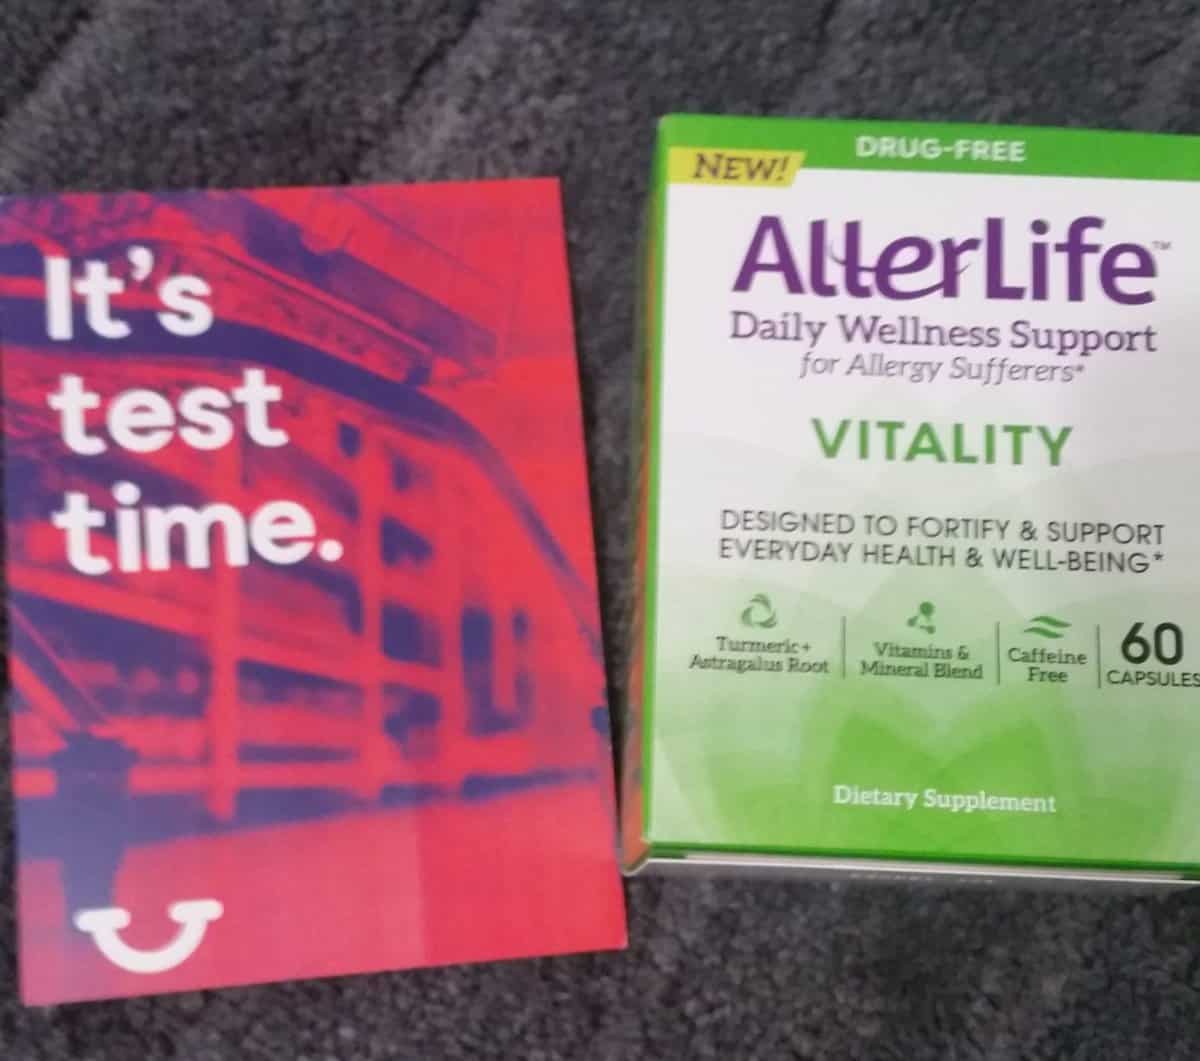 Allerlife Daily wellness support for allergy suffers Vitality box with home tester club card